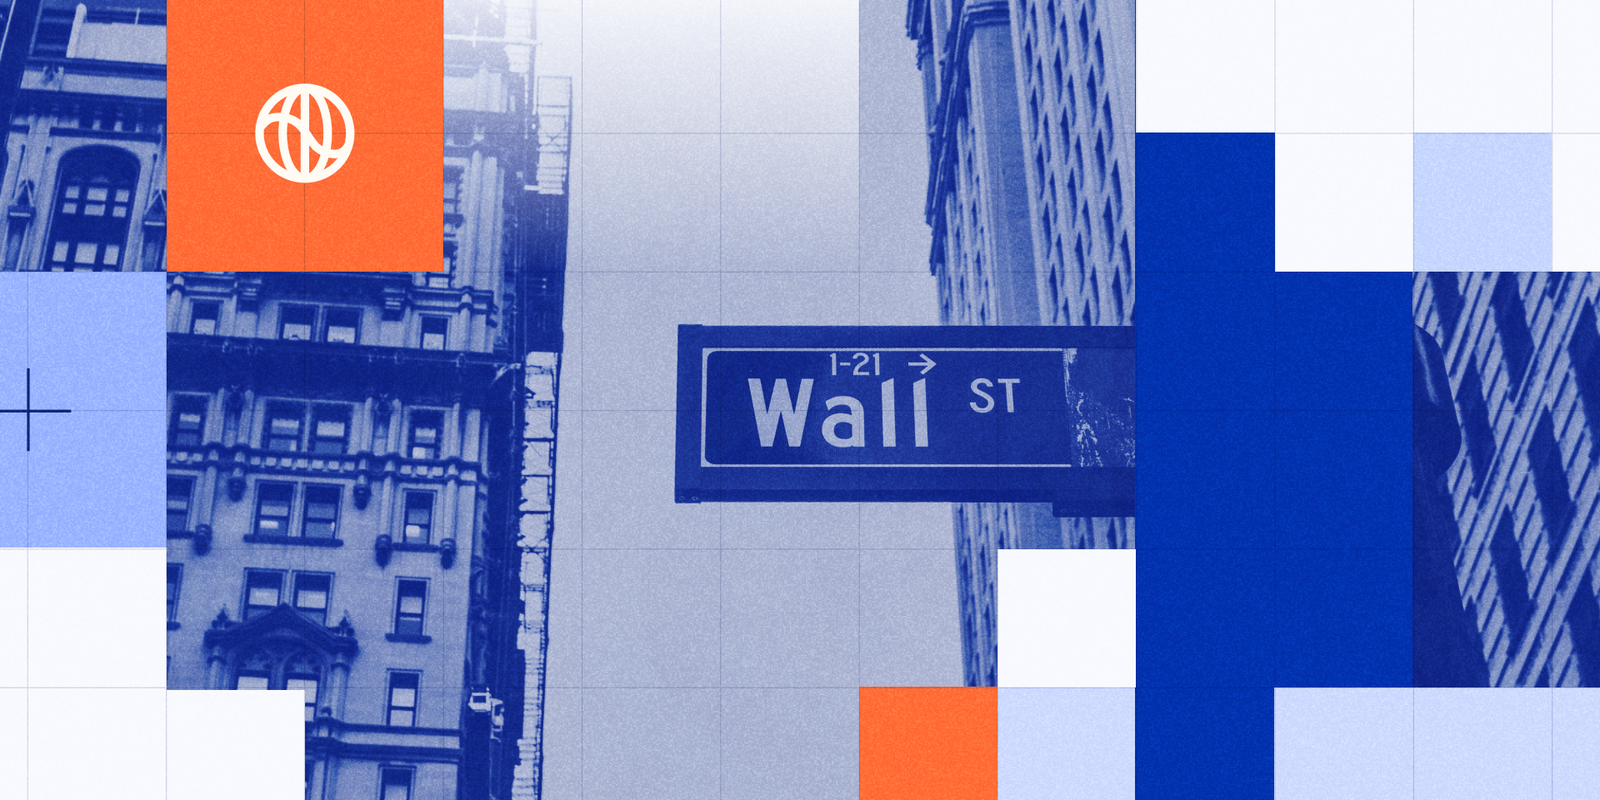 Image with a Wall Street sign